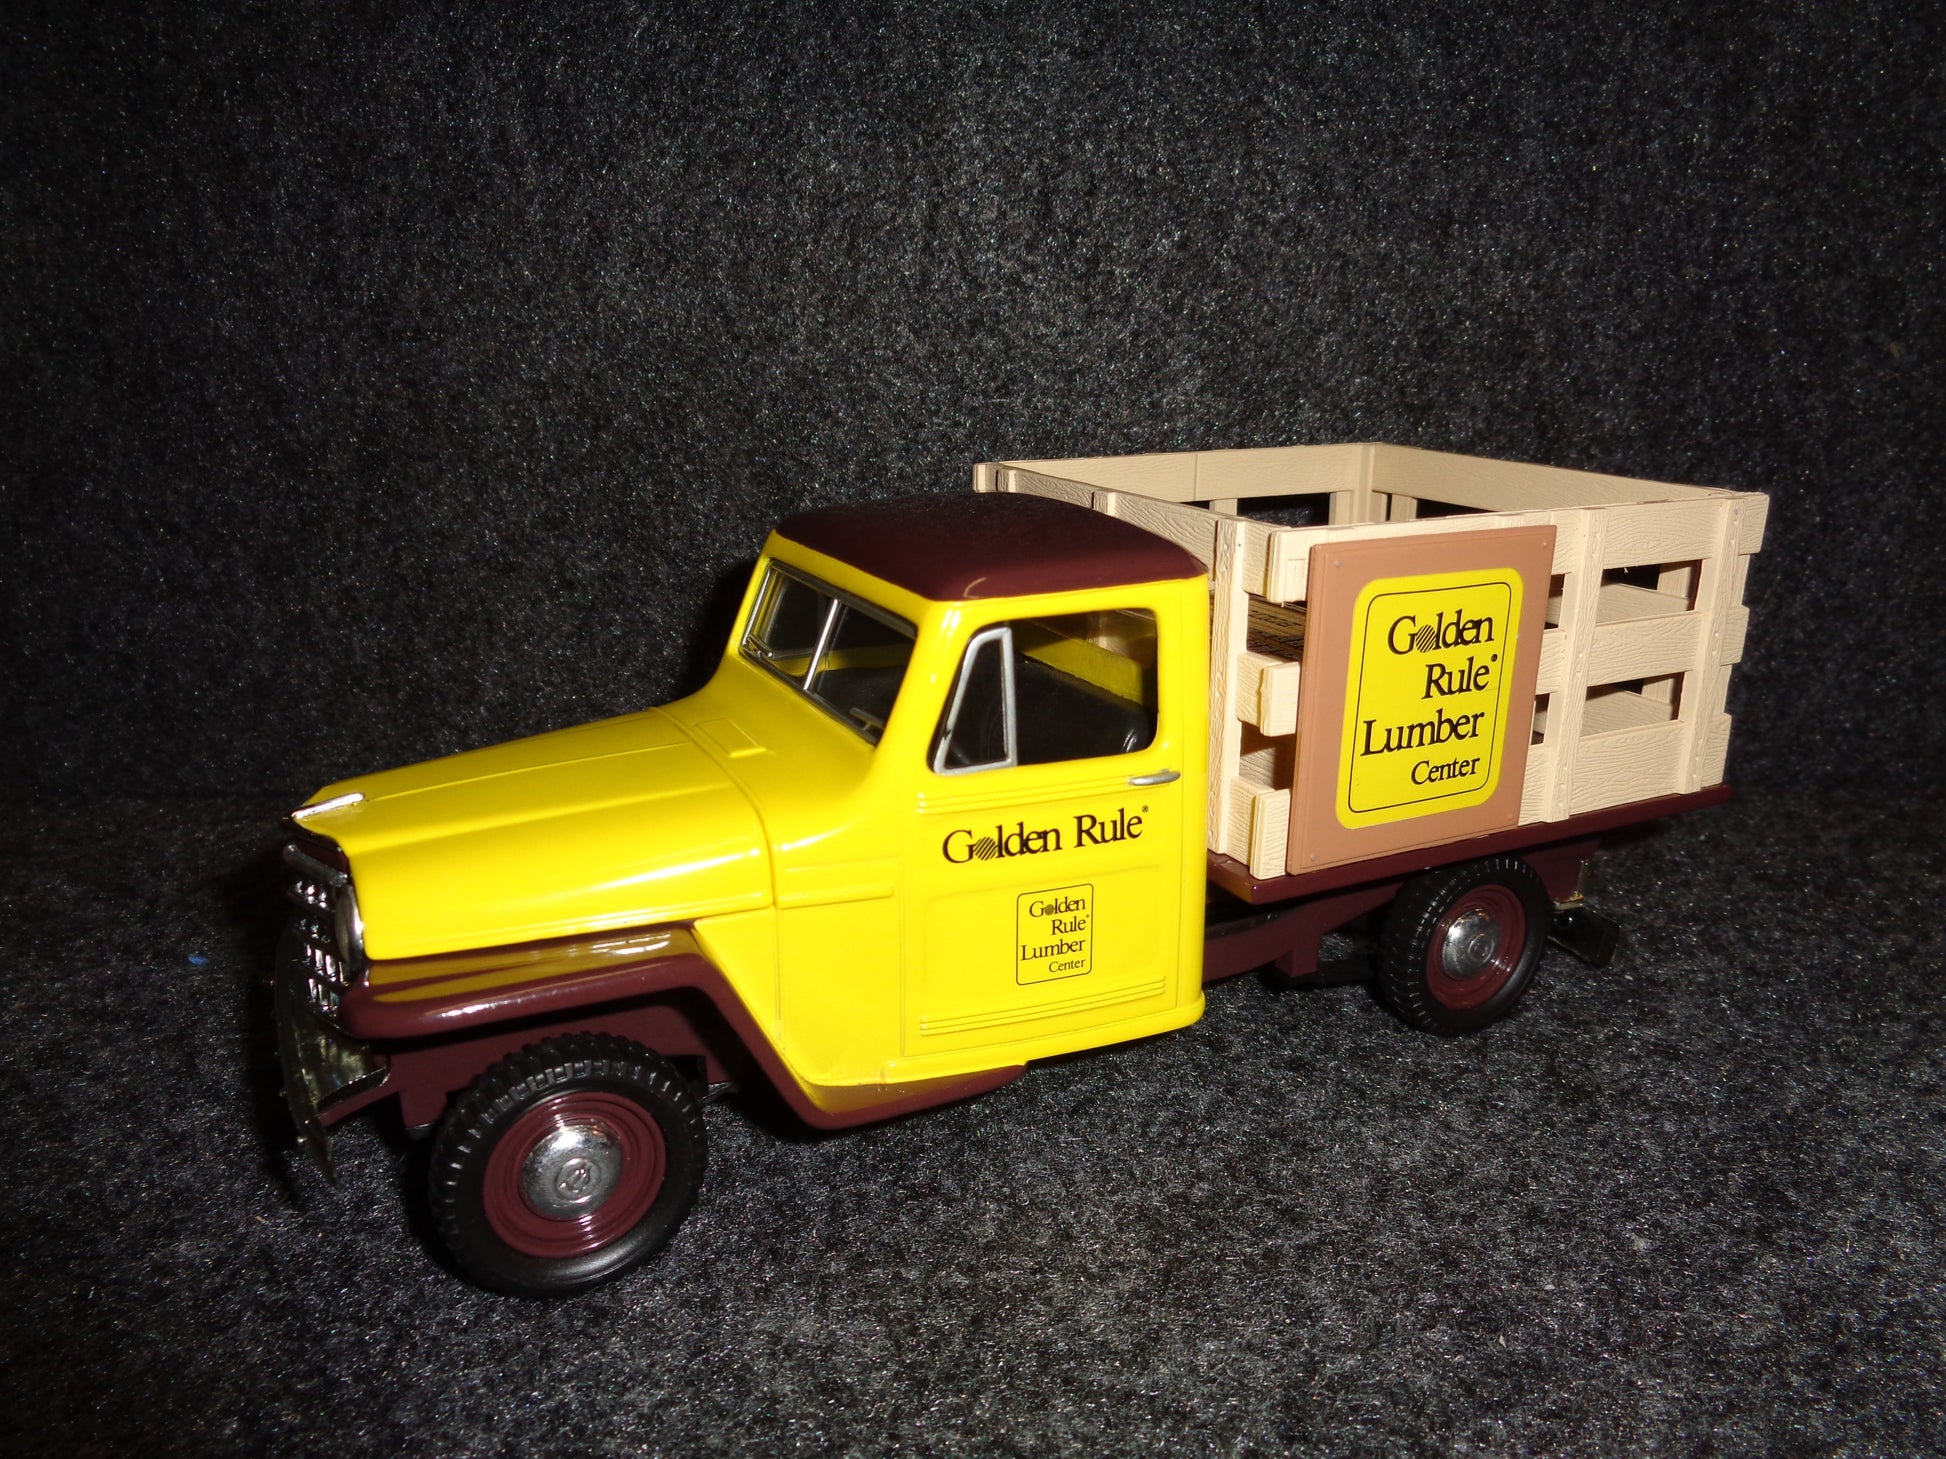 Golden Rule Lumber 1953 Willys Jeep Stake Bed Truck